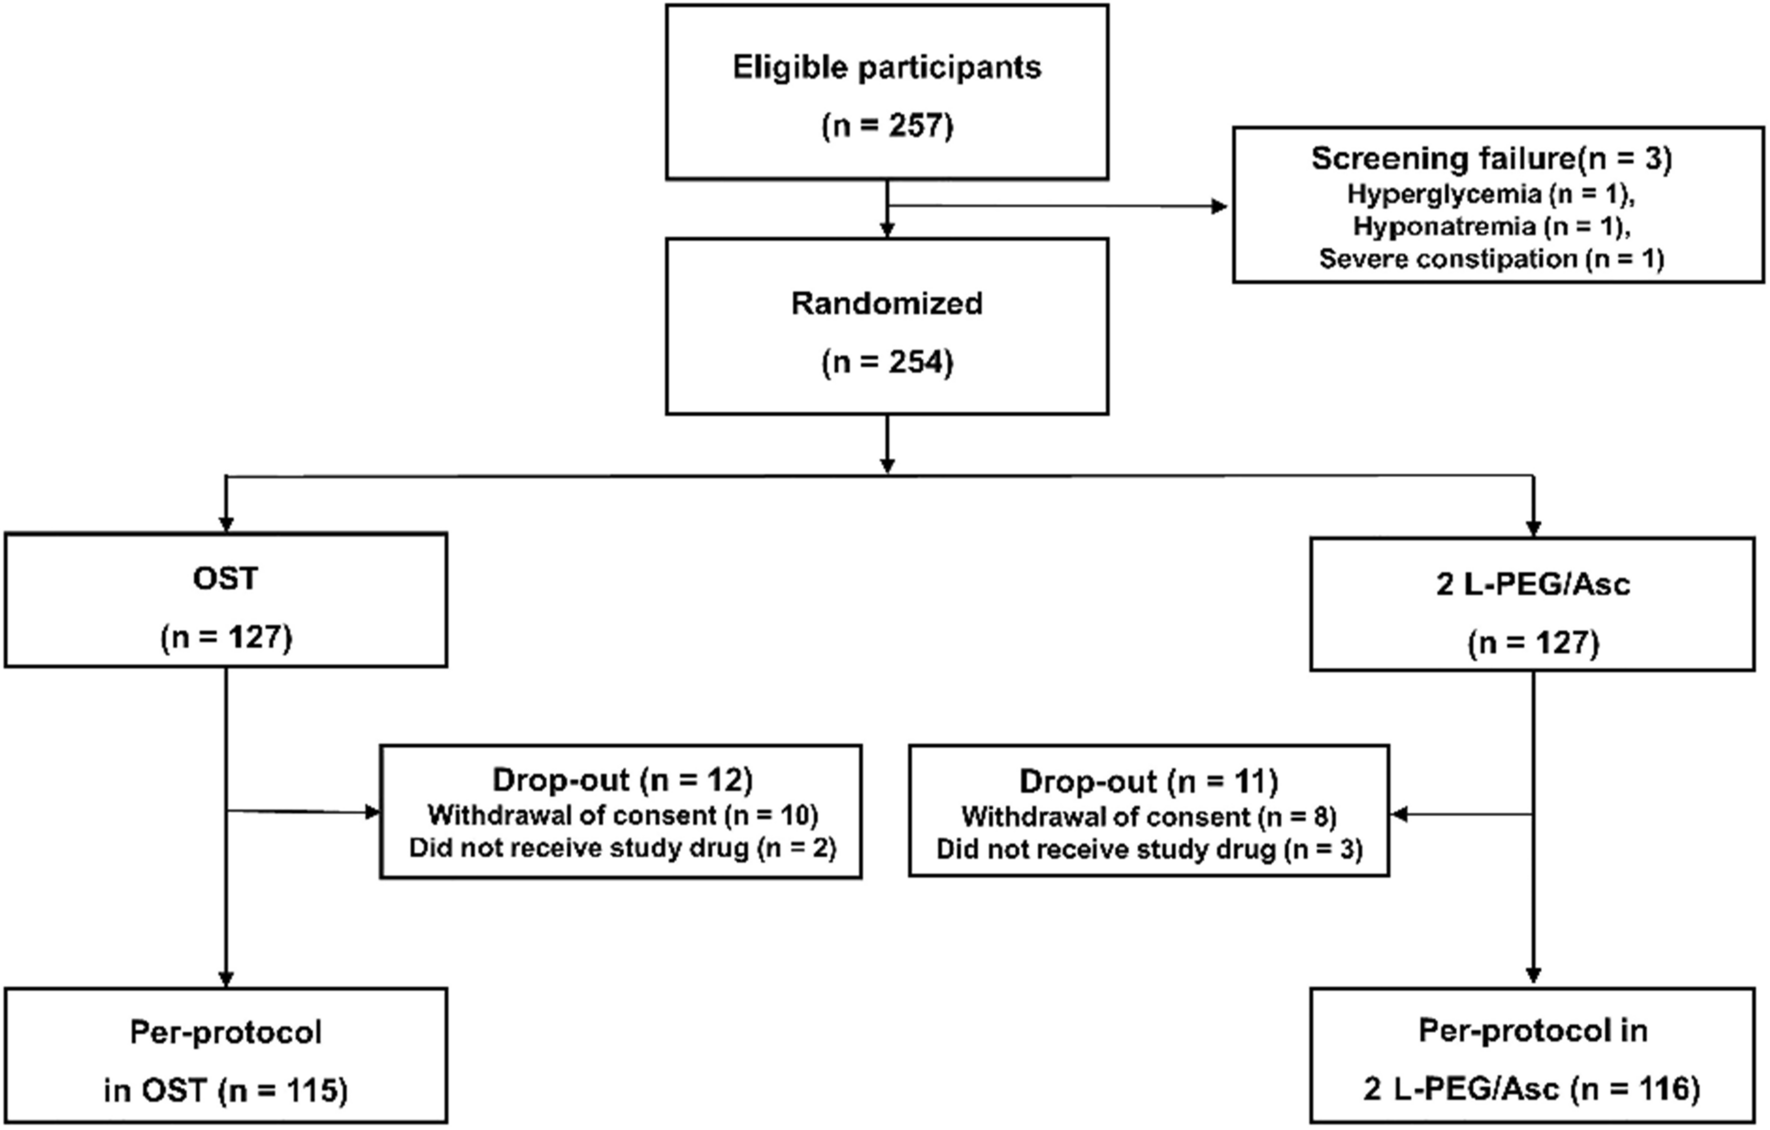 Efficacy, tolerability, and safety of oral sulfate tablet versus 2 L-polyethylene glycol/ascorbate for bowel preparation in older patients: prospective, multicenter, investigator single-blinded, randomized study